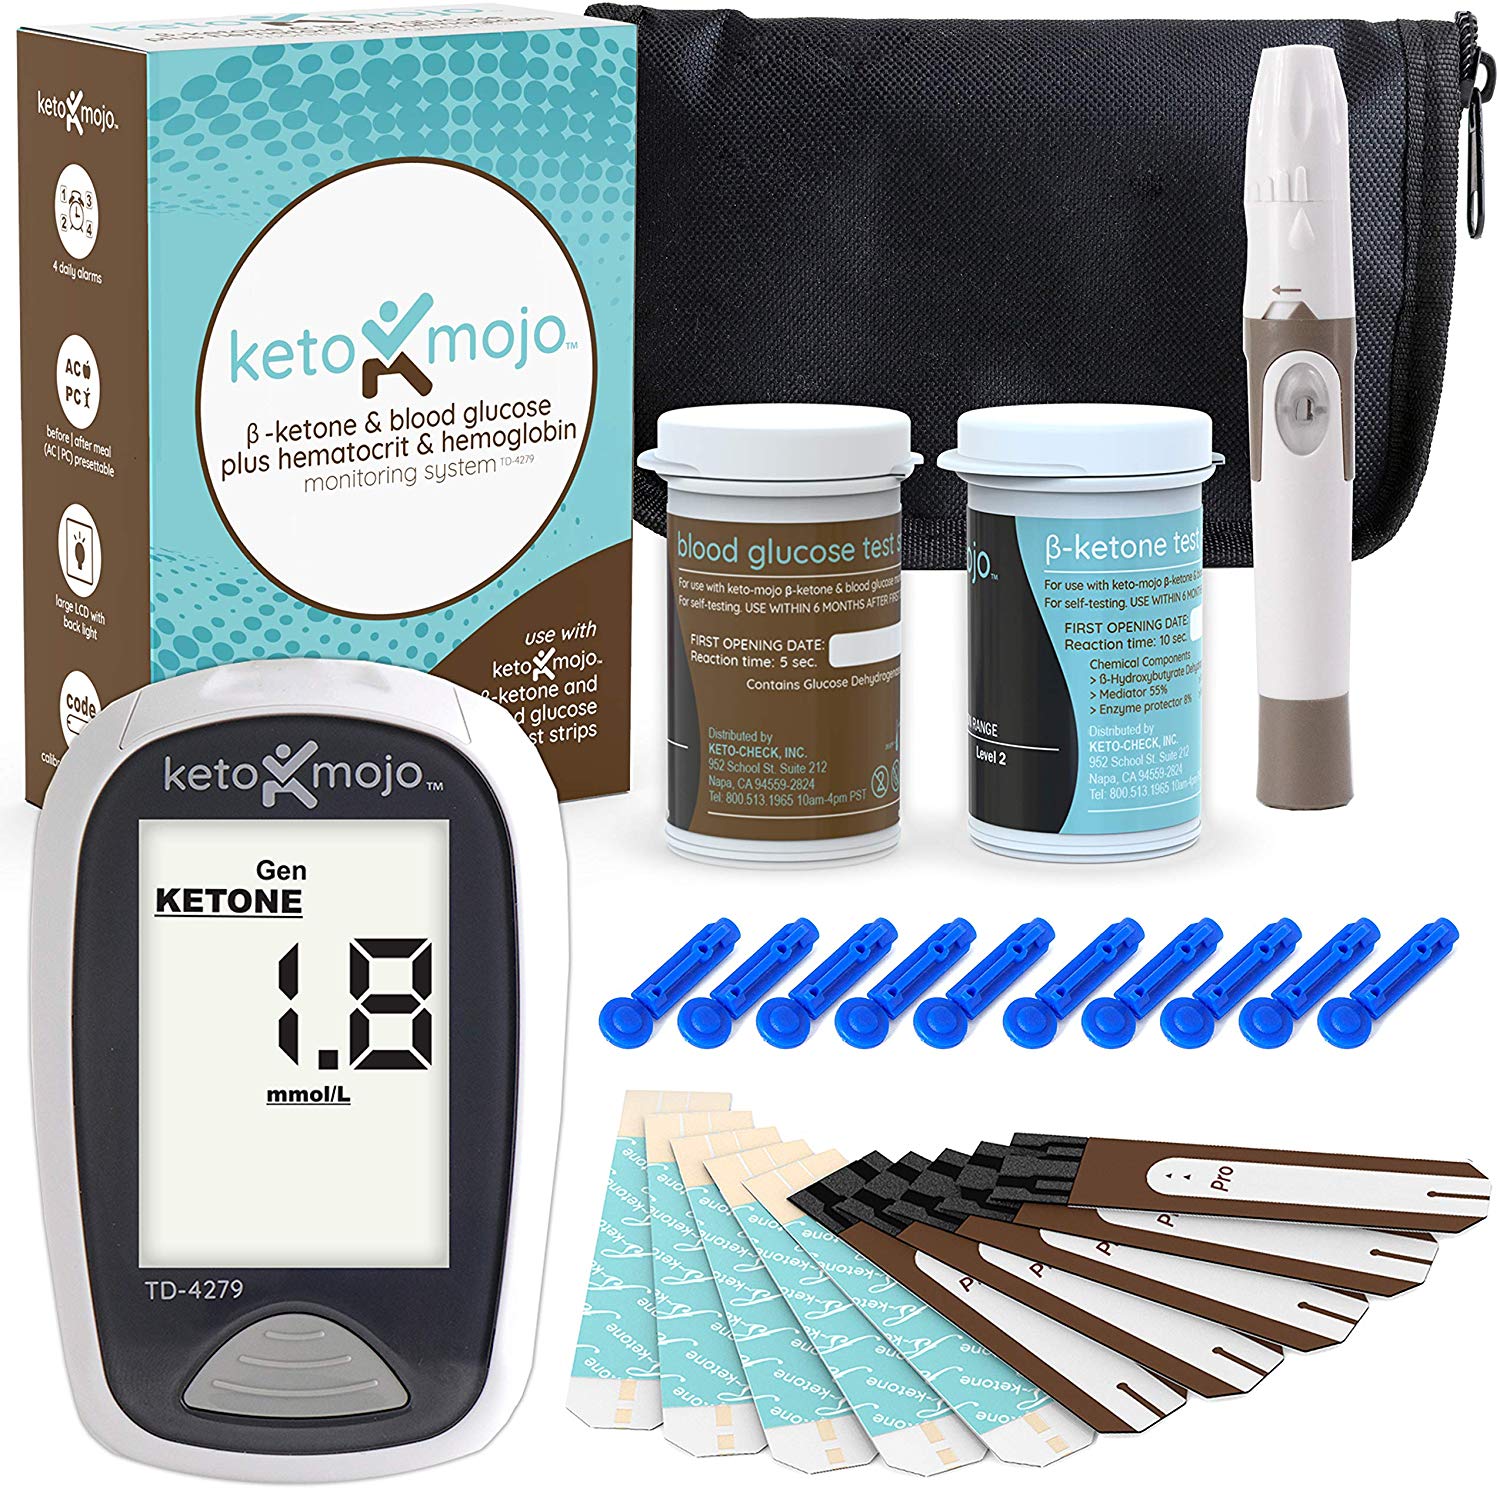 10 Best Glucose Meter With Cheapest Strips